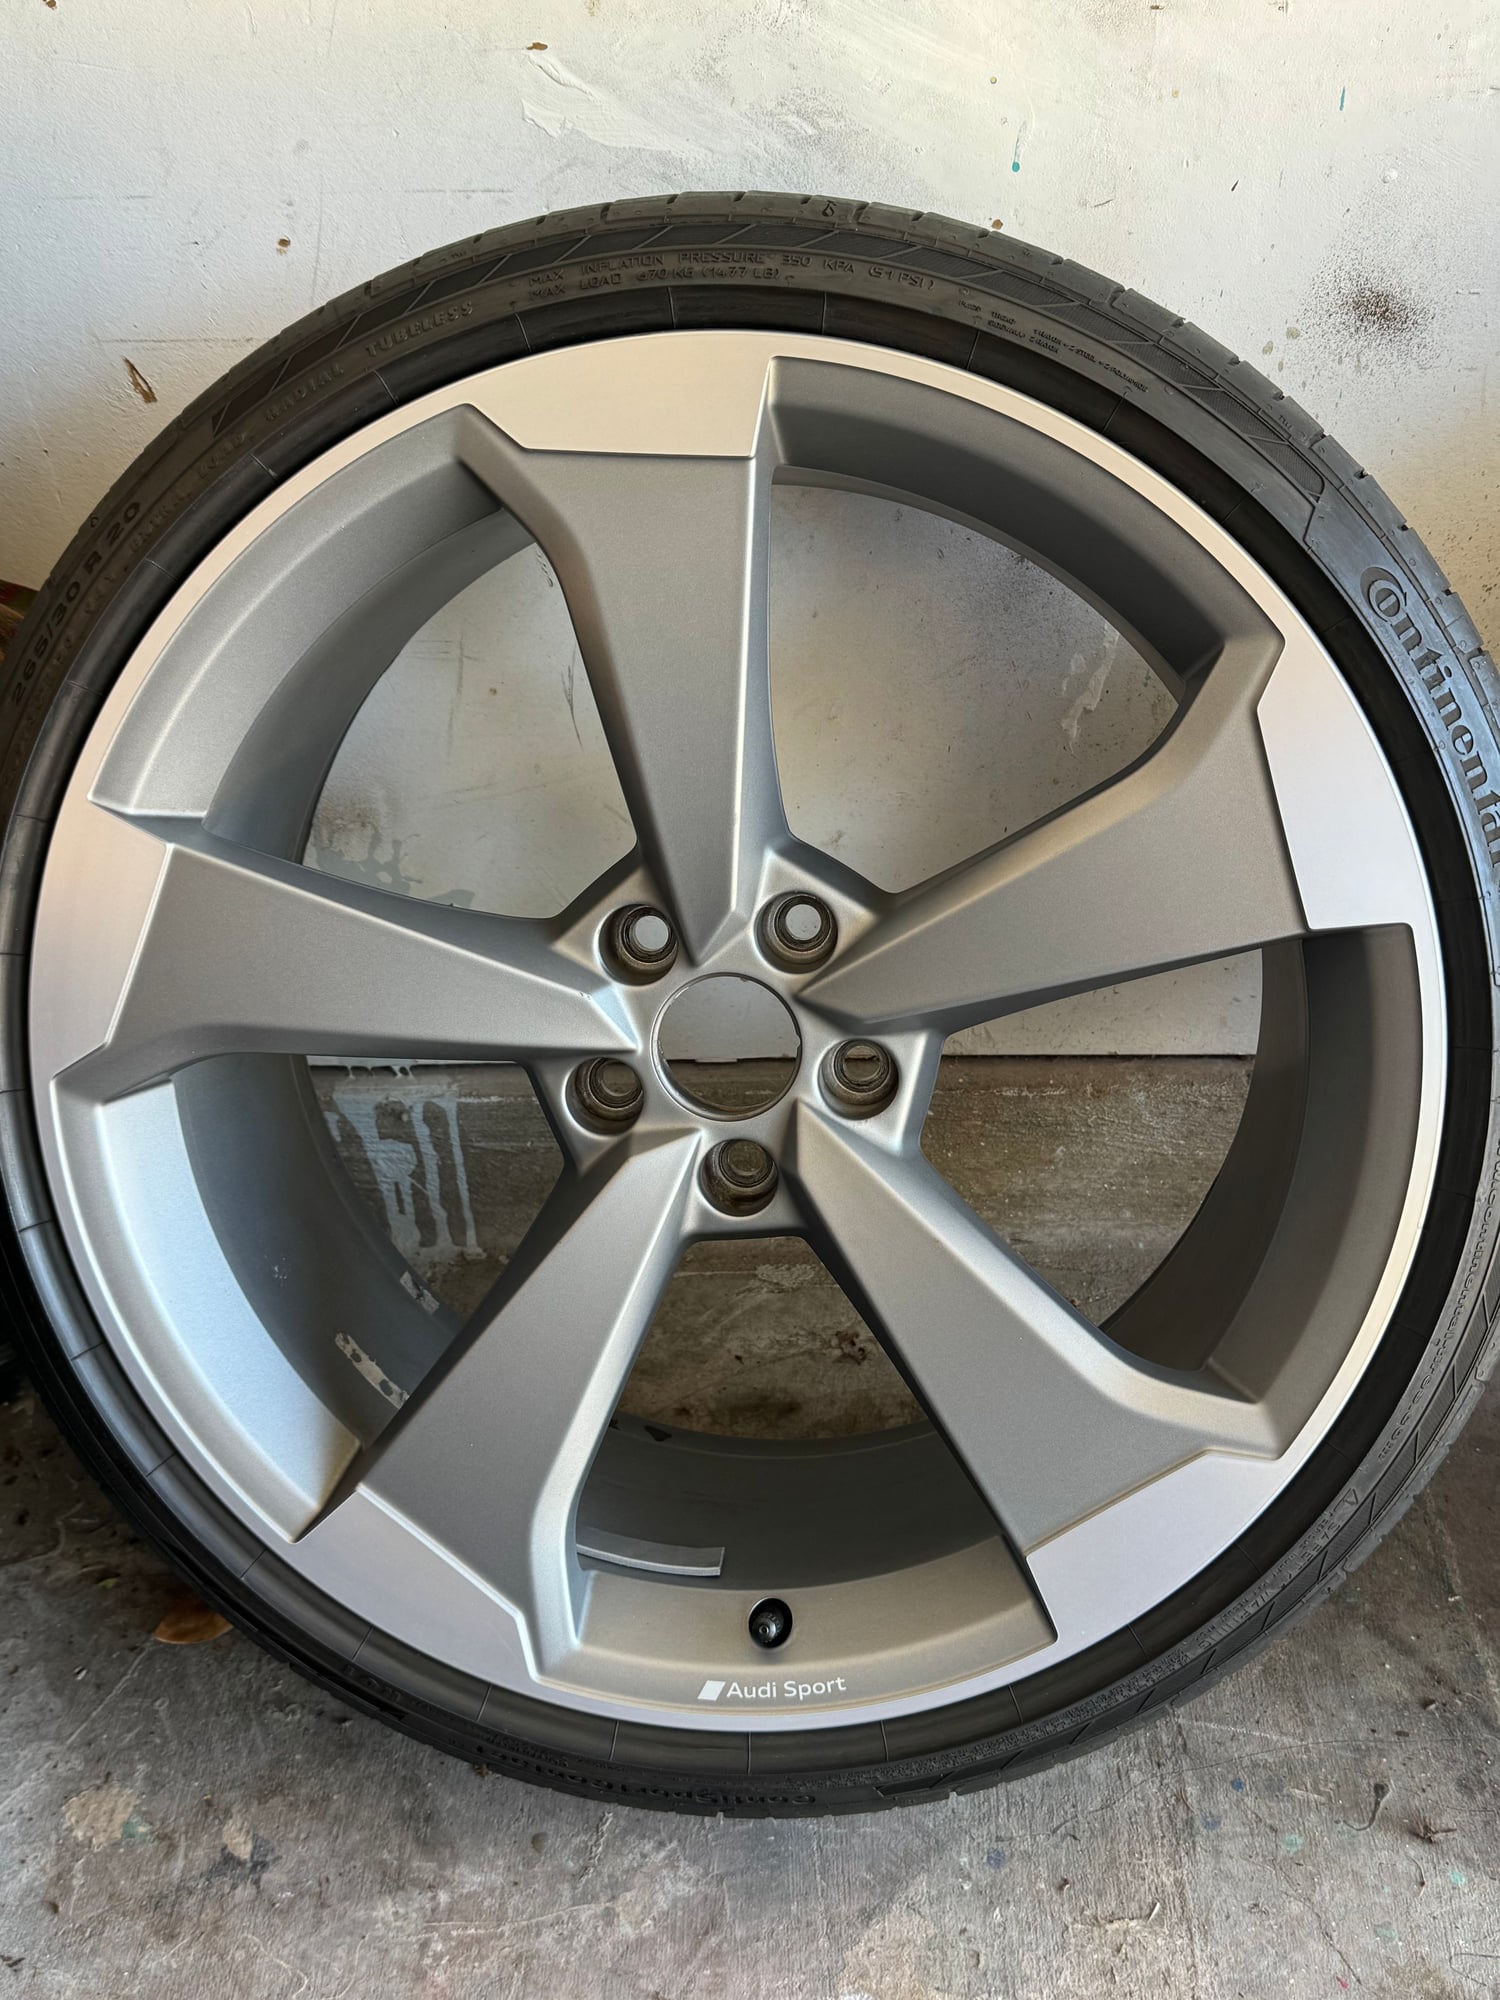 Wheels and Tires/Axles - OEM 20" Titanium Rotor wheels with tires $2,000 OBO + shipping - Used - 2018 to 2024 Audi S5 - Crowley, TX 76036, United States